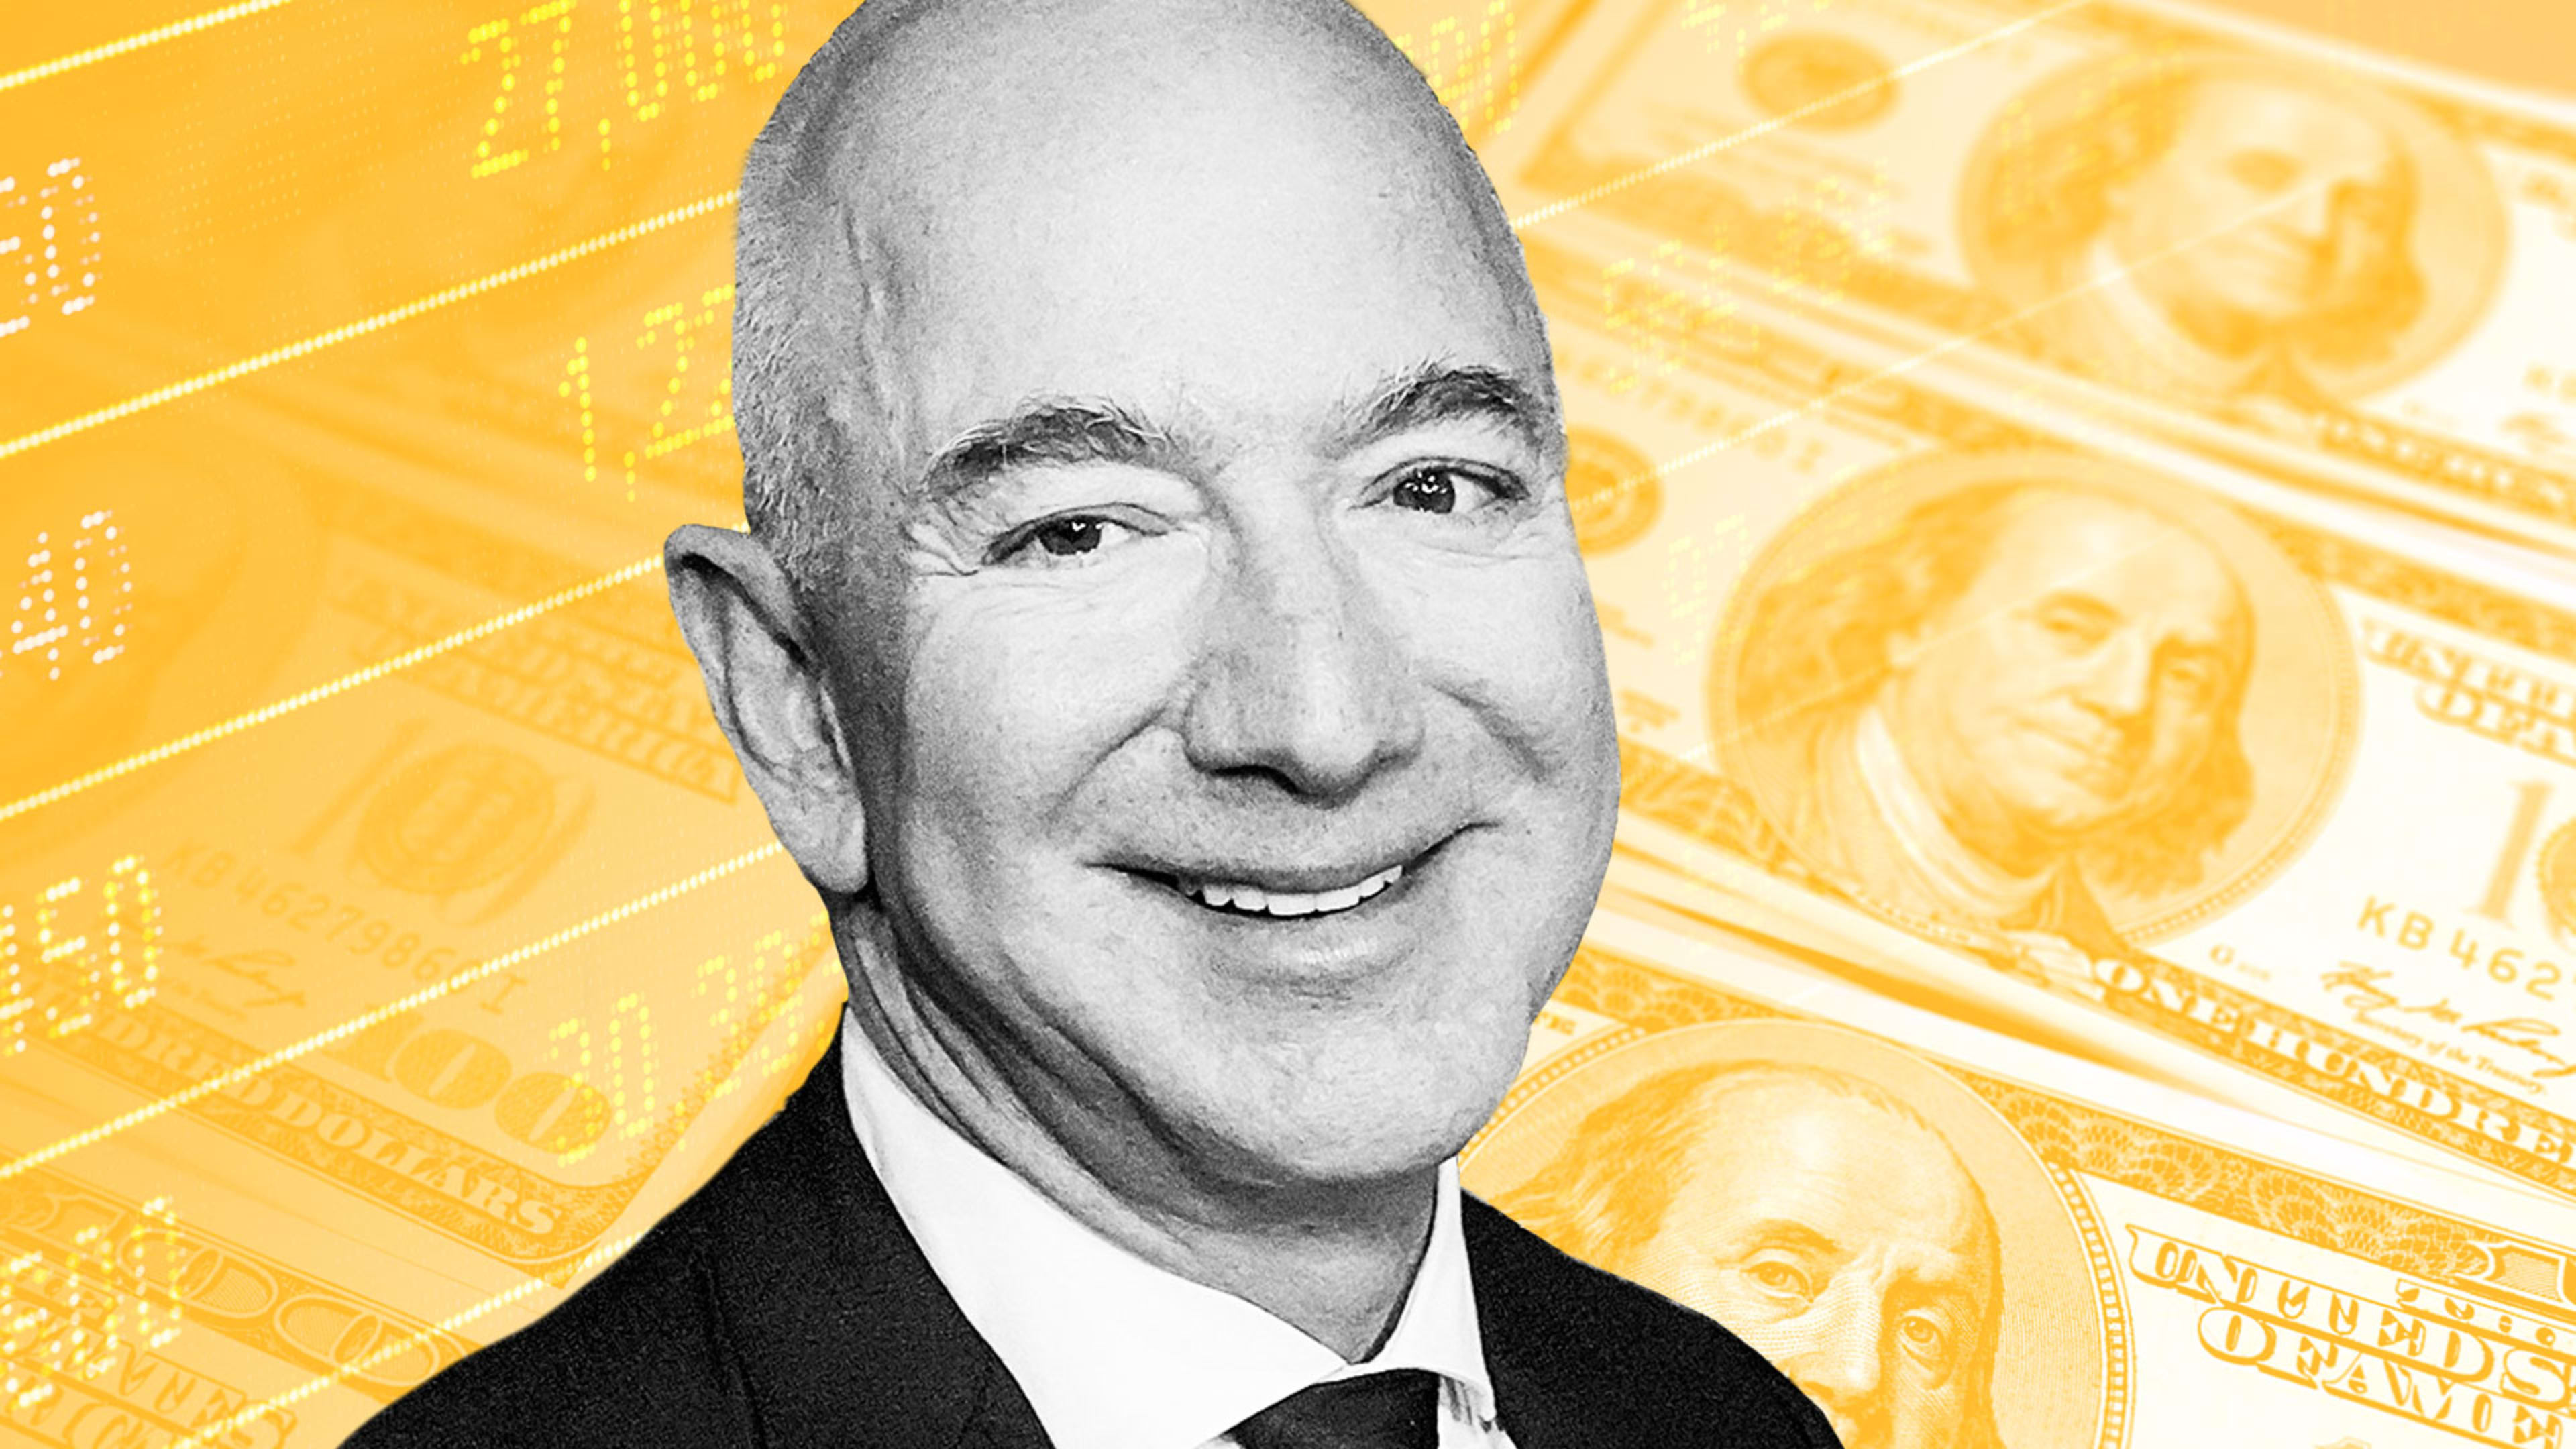 Is corporate greed driving inflation? Jeff Bezos and Joe Biden obviously disagree